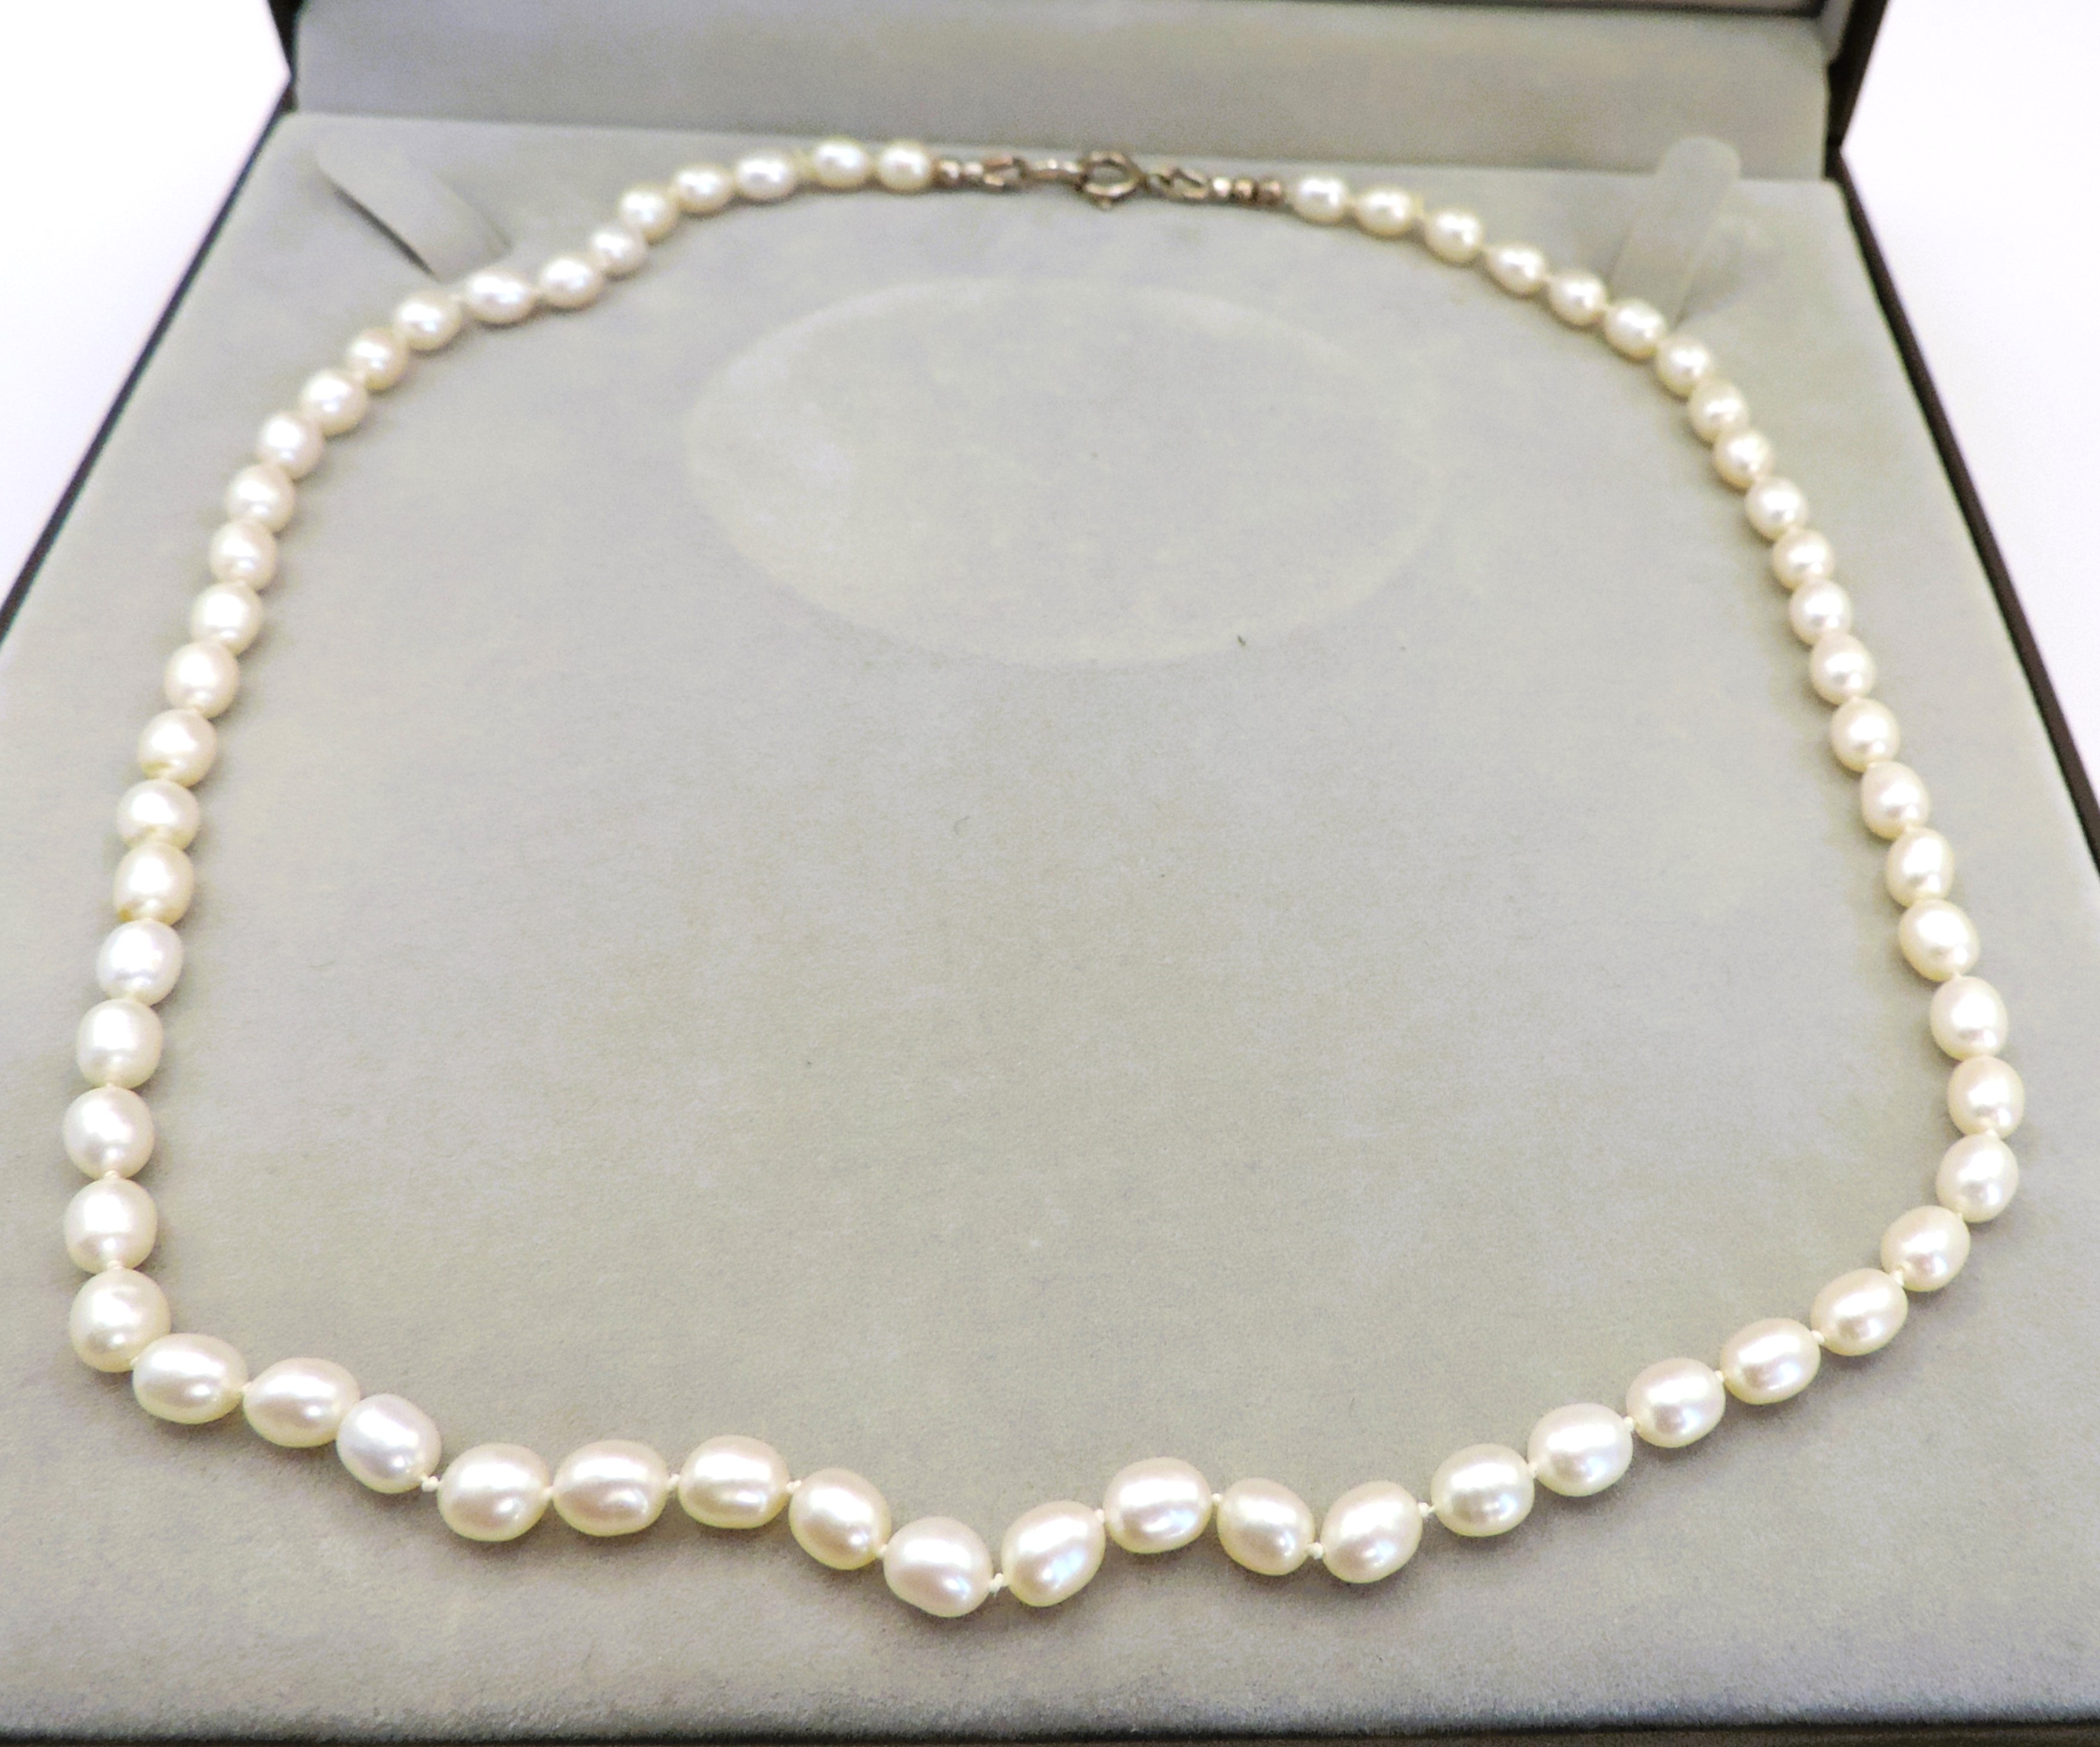 Cultured Pearl Necklace 6mm Oval Pearls Silver Clasp with Gift Pouch - Image 2 of 4